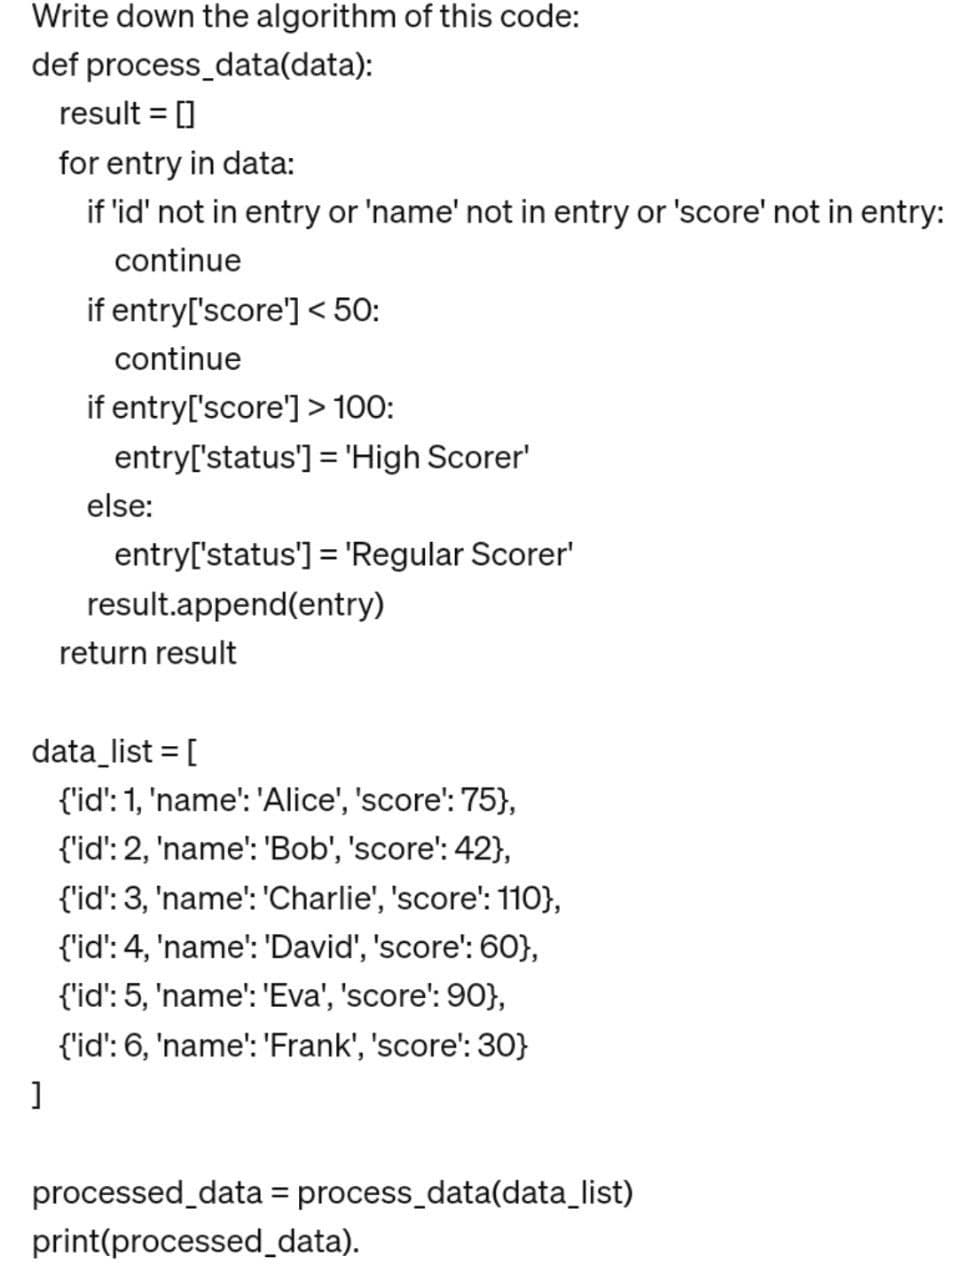 Write down the algorithm of this code:
def process_data(data):
result = []
for entry in data:
if 'id' not in entry or 'name' not in entry or 'score' not in entry:
continue
if entry['score'] < 50:
continue
if entry['score'] > 100:
entry['status'] = 'High Scorer'
else:
entry['status'] = 'Regular Scorer'
result.append(entry)
return result
data_list = [
{'id': 1, 'name': 'Alice', 'score': 75},
{'id': 2, 'name': 'Bob', 'score': 42},
{'id': 3, 'name': 'Charlie', 'score': 110},
{'id': 4, 'name': 'David', 'score': 60},
{'id': 5, 'name': 'Eva', 'score': 90},
{'id': 6, 'name': 'Frank', 'score': 30}
]
processed_data = process_data(data_list)
print(processed_data).